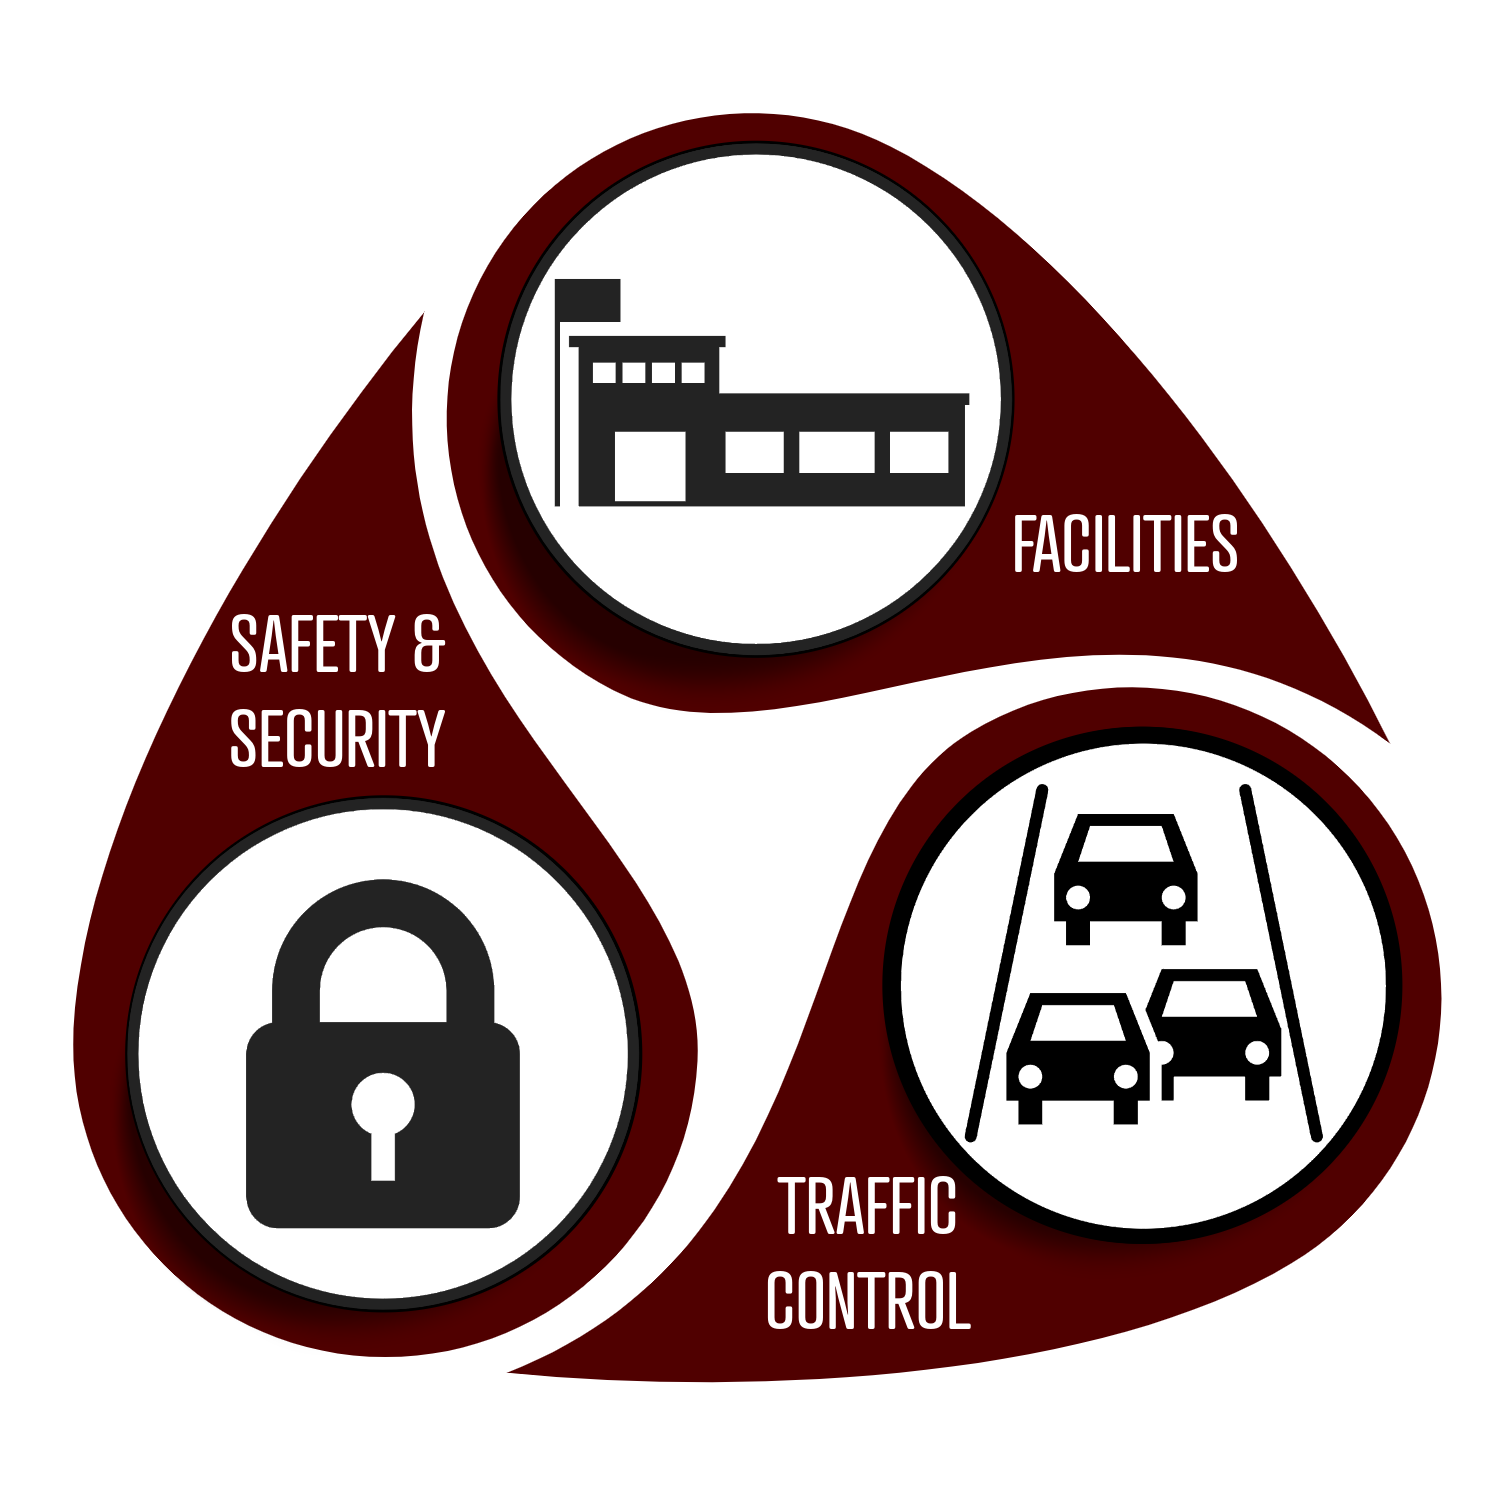 Bond Components with icons representing Safety & Security, Traffic Control, and Facilities